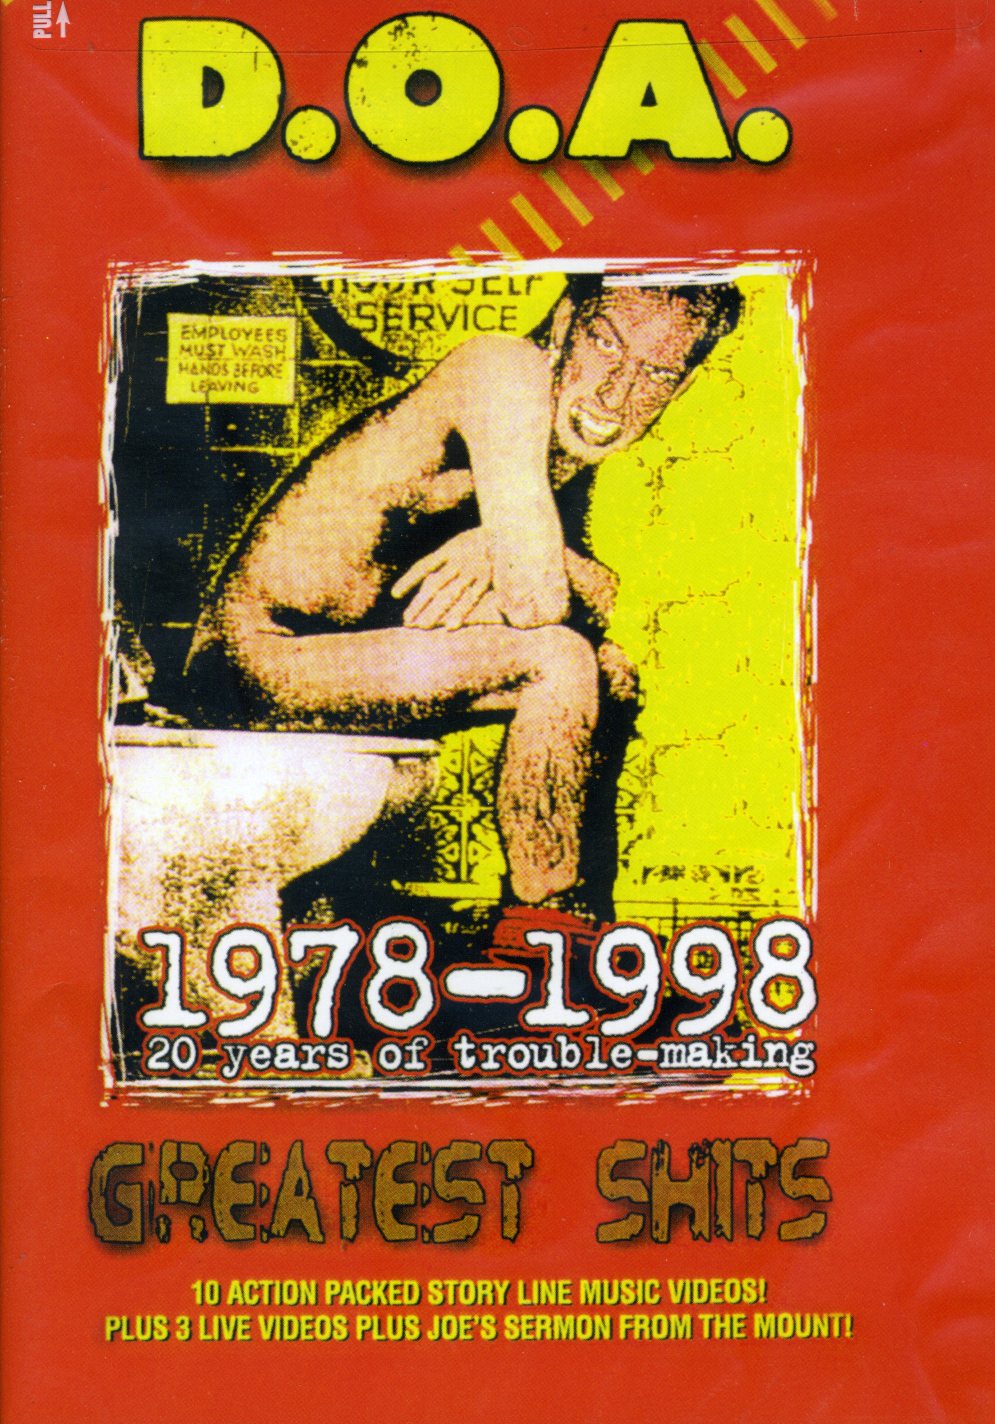 GREATEST SHITS 1978-1998